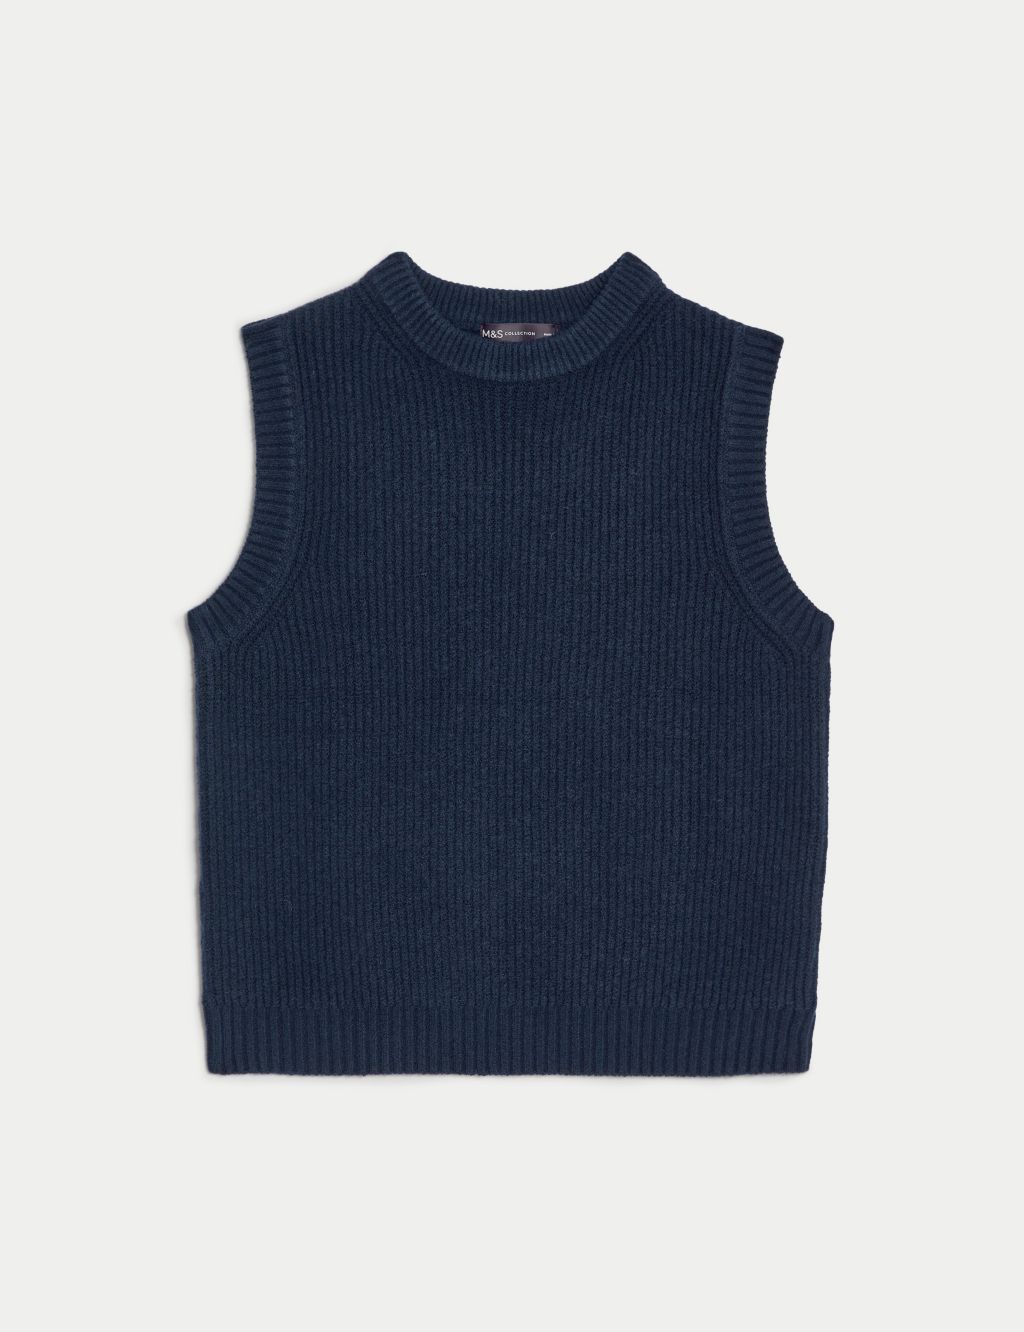 Air-Yarn Ribbed Crew Neck Knitted Vest image 2